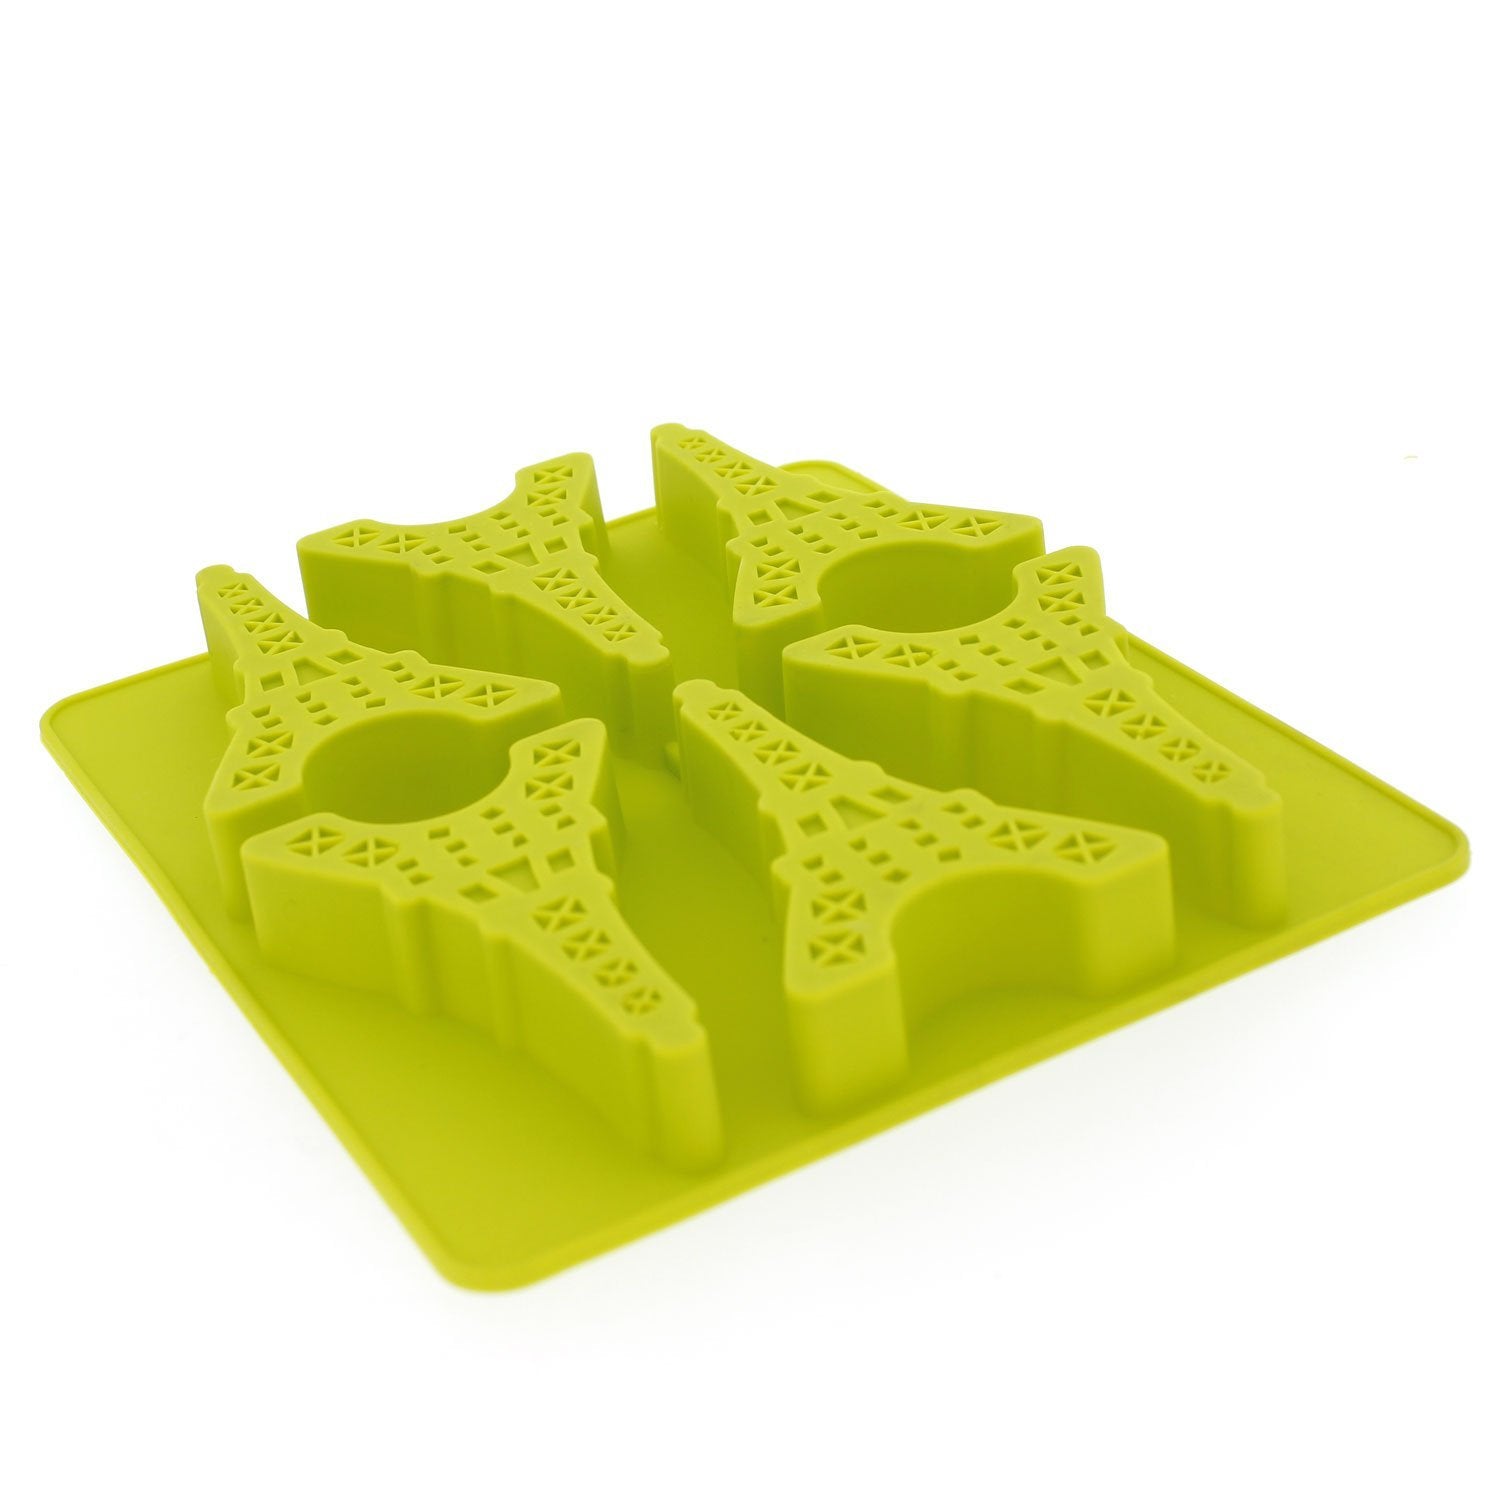 Elbee Home 6-Piece Silicone Eiffel Tower Tray for Making Homemade Ice, Candy, Chocolate, Gummy, Jello, and More